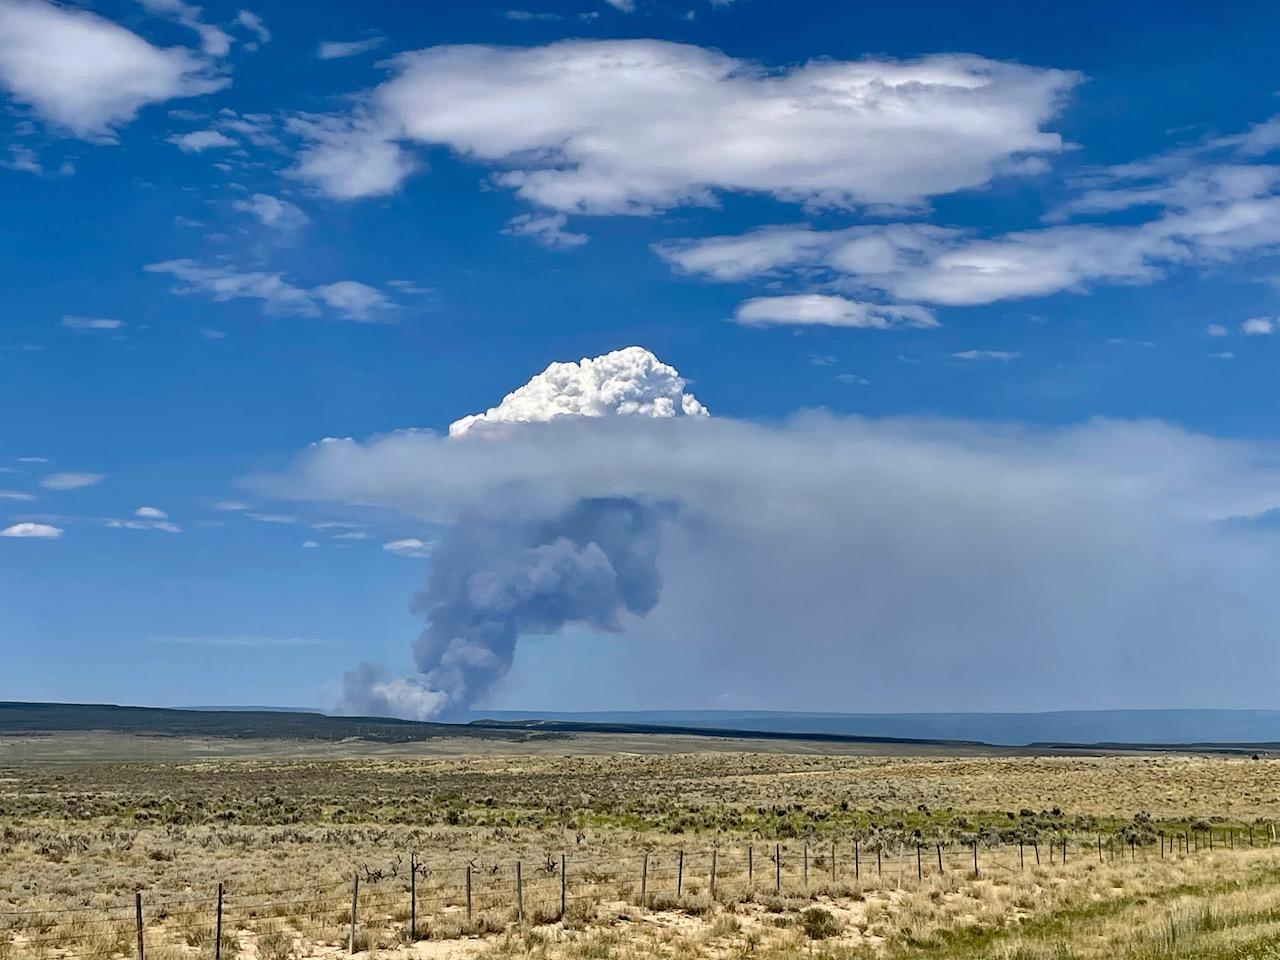 The image shows a large smoke column rising from a desert landscape